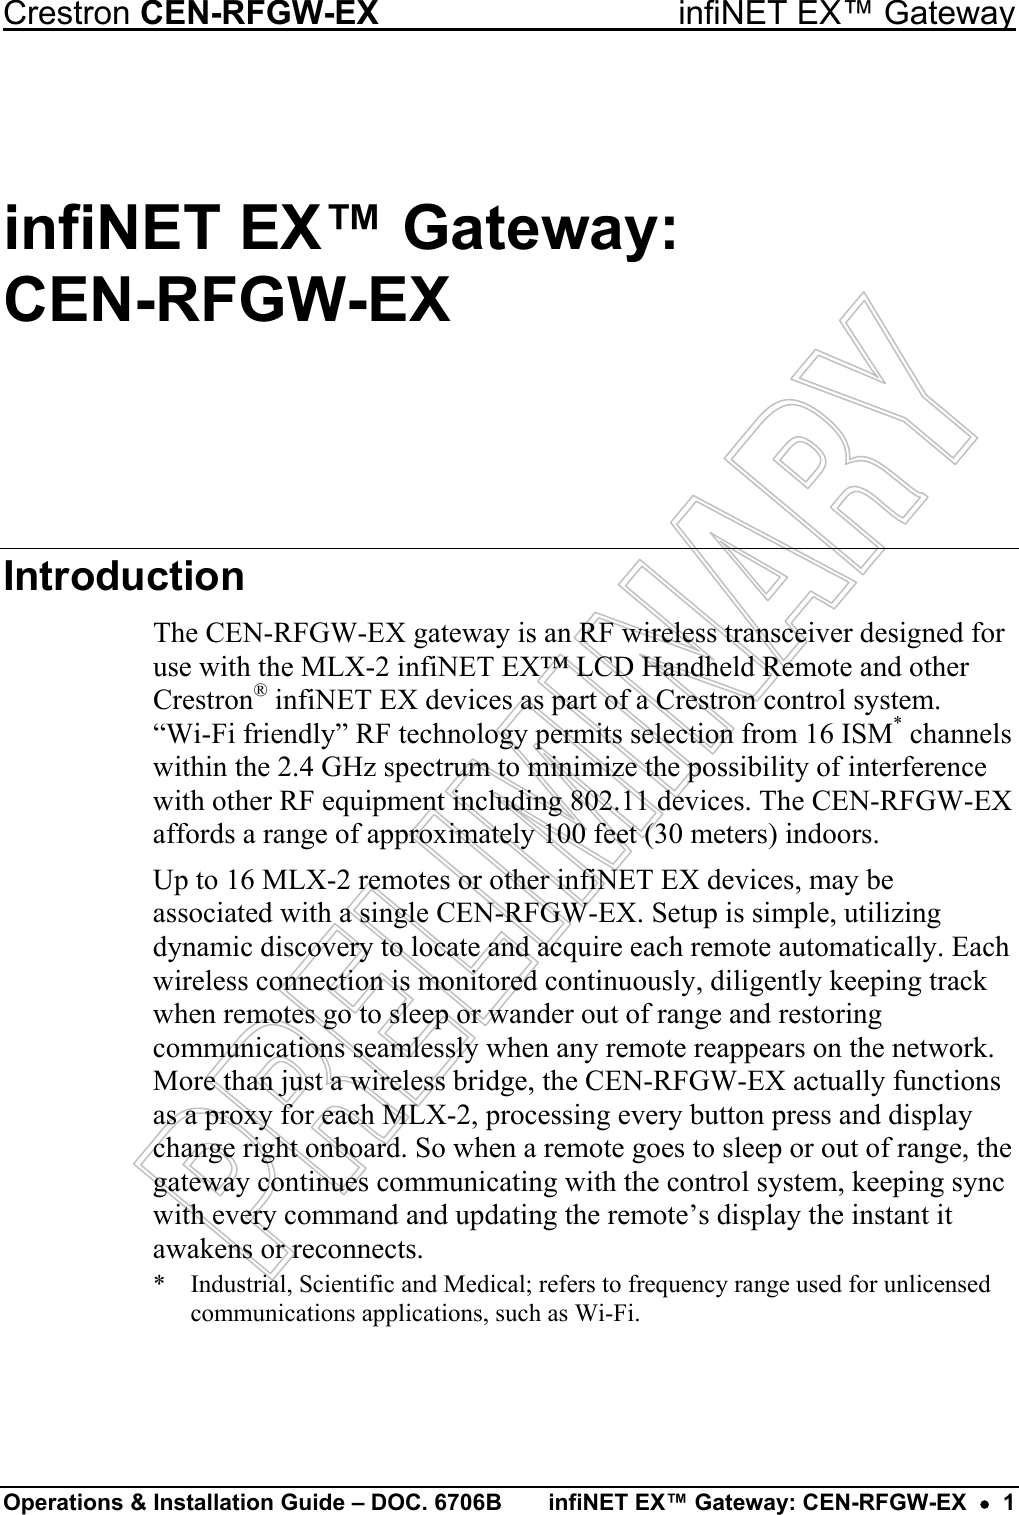 Crestron CEN-RFGW-EX  infiNET EX™ Gateway infiNET EX™ Gateway:  CEN-RFGW-EX Introduction The CEN-RFGW-EX gateway is an RF wireless transceiver designed for use with the MLX-2 infiNET EX™ LCD Handheld Remote and other Crestron® infiNET EX devices as part of a Crestron control system.  “Wi-Fi friendly” RF technology permits selection from 16 ISM* channels within the 2.4 GHz spectrum to minimize the possibility of interference with other RF equipment including 802.11 devices. The CEN-RFGW-EX affords a range of approximately 100 feet (30 meters) indoors. Up to 16 MLX-2 remotes or other infiNET EX devices, may be associated with a single CEN-RFGW-EX. Setup is simple, utilizing dynamic discovery to locate and acquire each remote automatically. Each wireless connection is monitored continuously, diligently keeping track when remotes go to sleep or wander out of range and restoring communications seamlessly when any remote reappears on the network. More than just a wireless bridge, the CEN-RFGW-EX actually functions as a proxy for each MLX-2, processing every button press and display change right onboard. So when a remote goes to sleep or out of range, the gateway continues communicating with the control system, keeping sync with every command and updating the remote’s display the instant it awakens or reconnects. *  Industrial, Scientific and Medical; refers to frequency range used for unlicensed communications applications, such as Wi-Fi.   Operations &amp; Installation Guide – DOC. 6706B  infiNET EX™ Gateway: CEN-RFGW-EX  •  1 